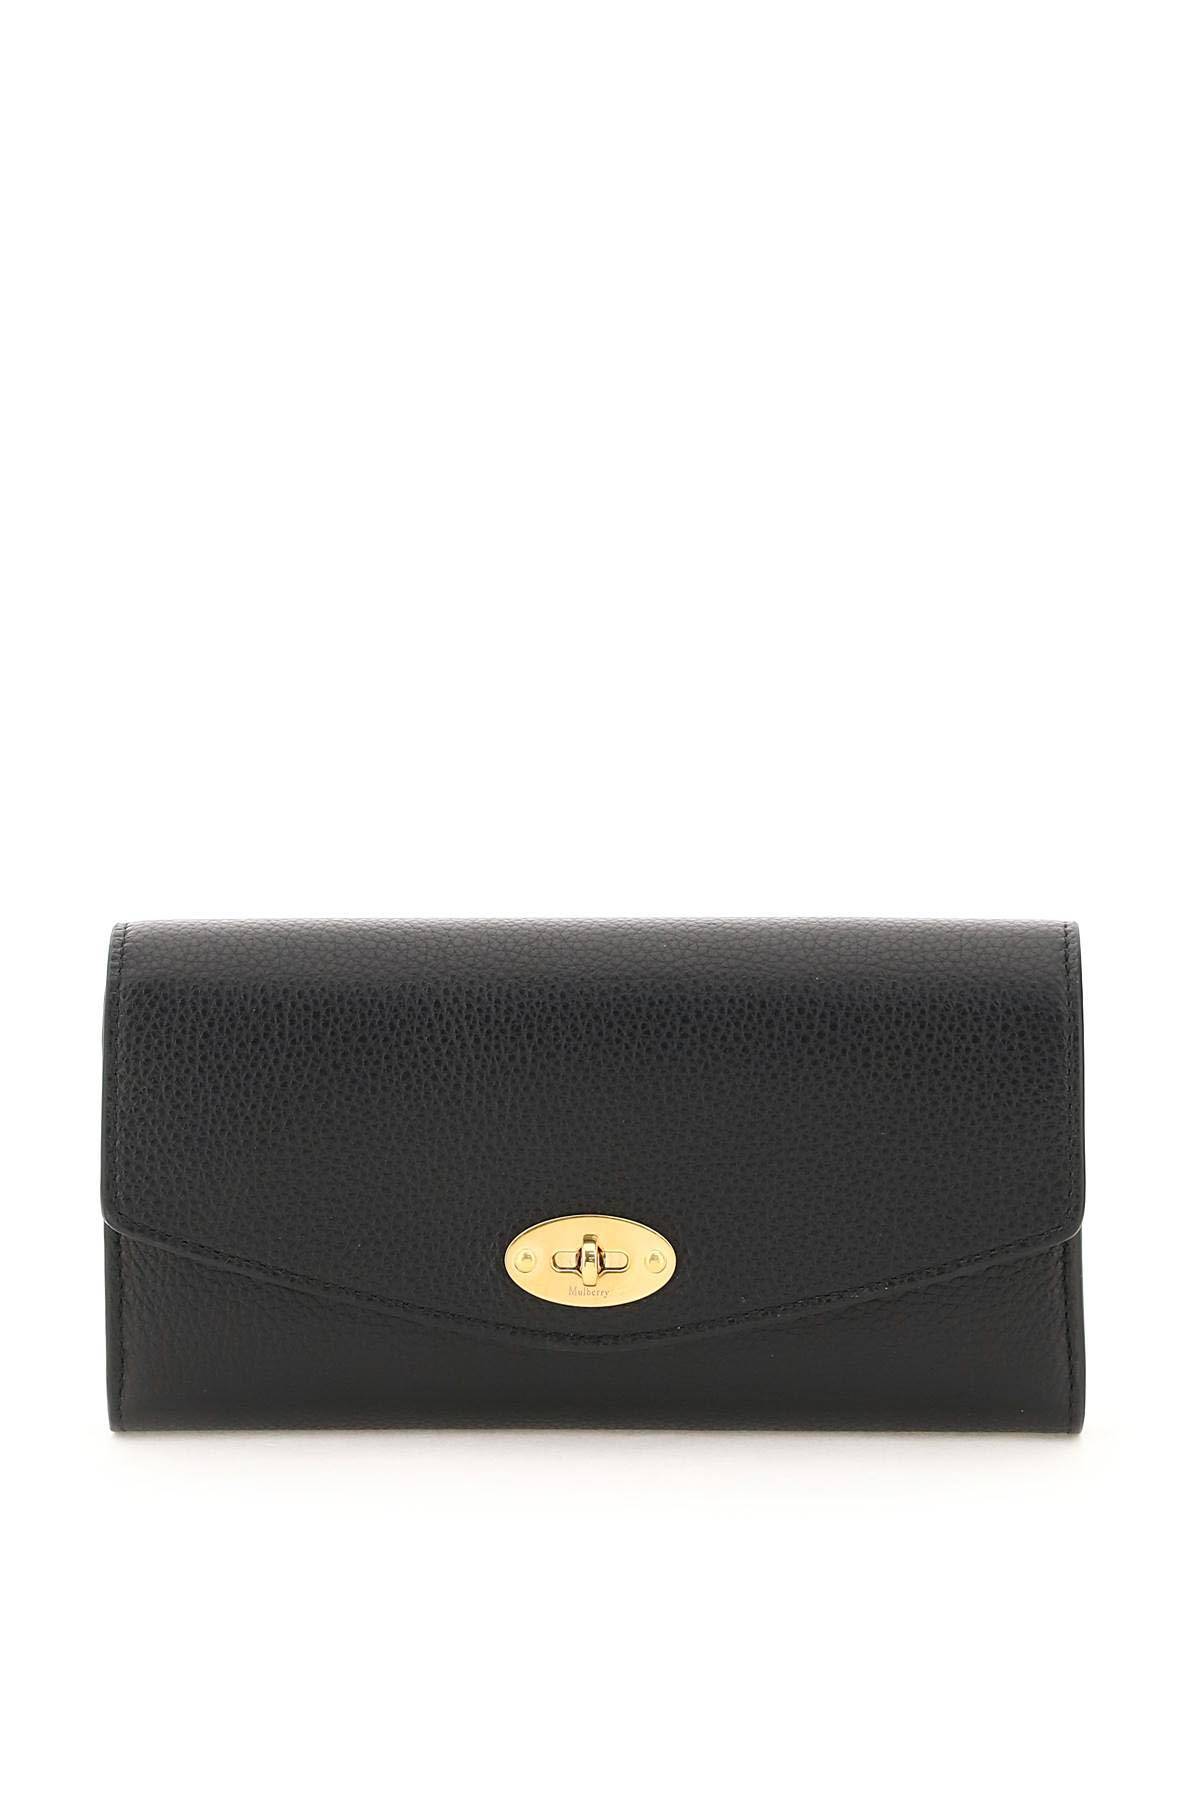 Mulberry MULBERRY darley wallet